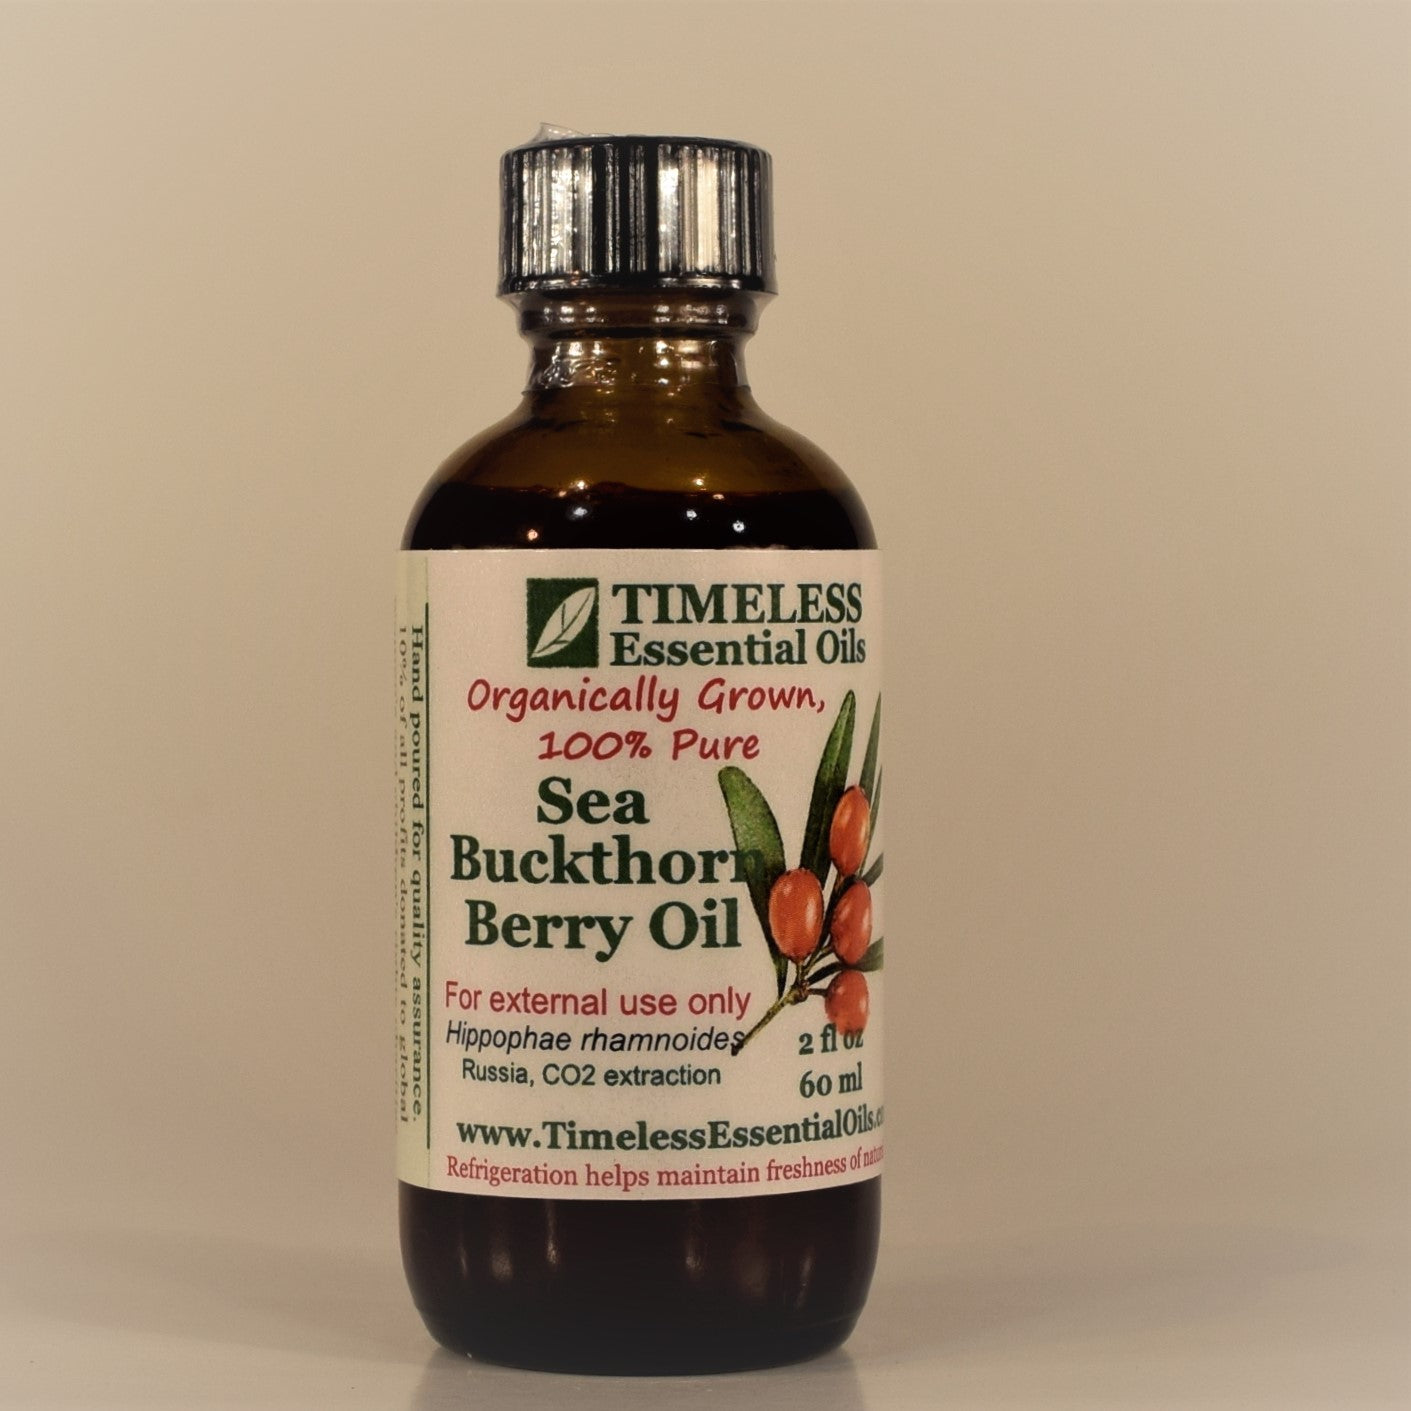 TIMELESS Organic Sea Buckthorn Berry Oil is rich in beta carotene and Vitamin E.  It is used to treat damaged skin and promotes wound healing. 